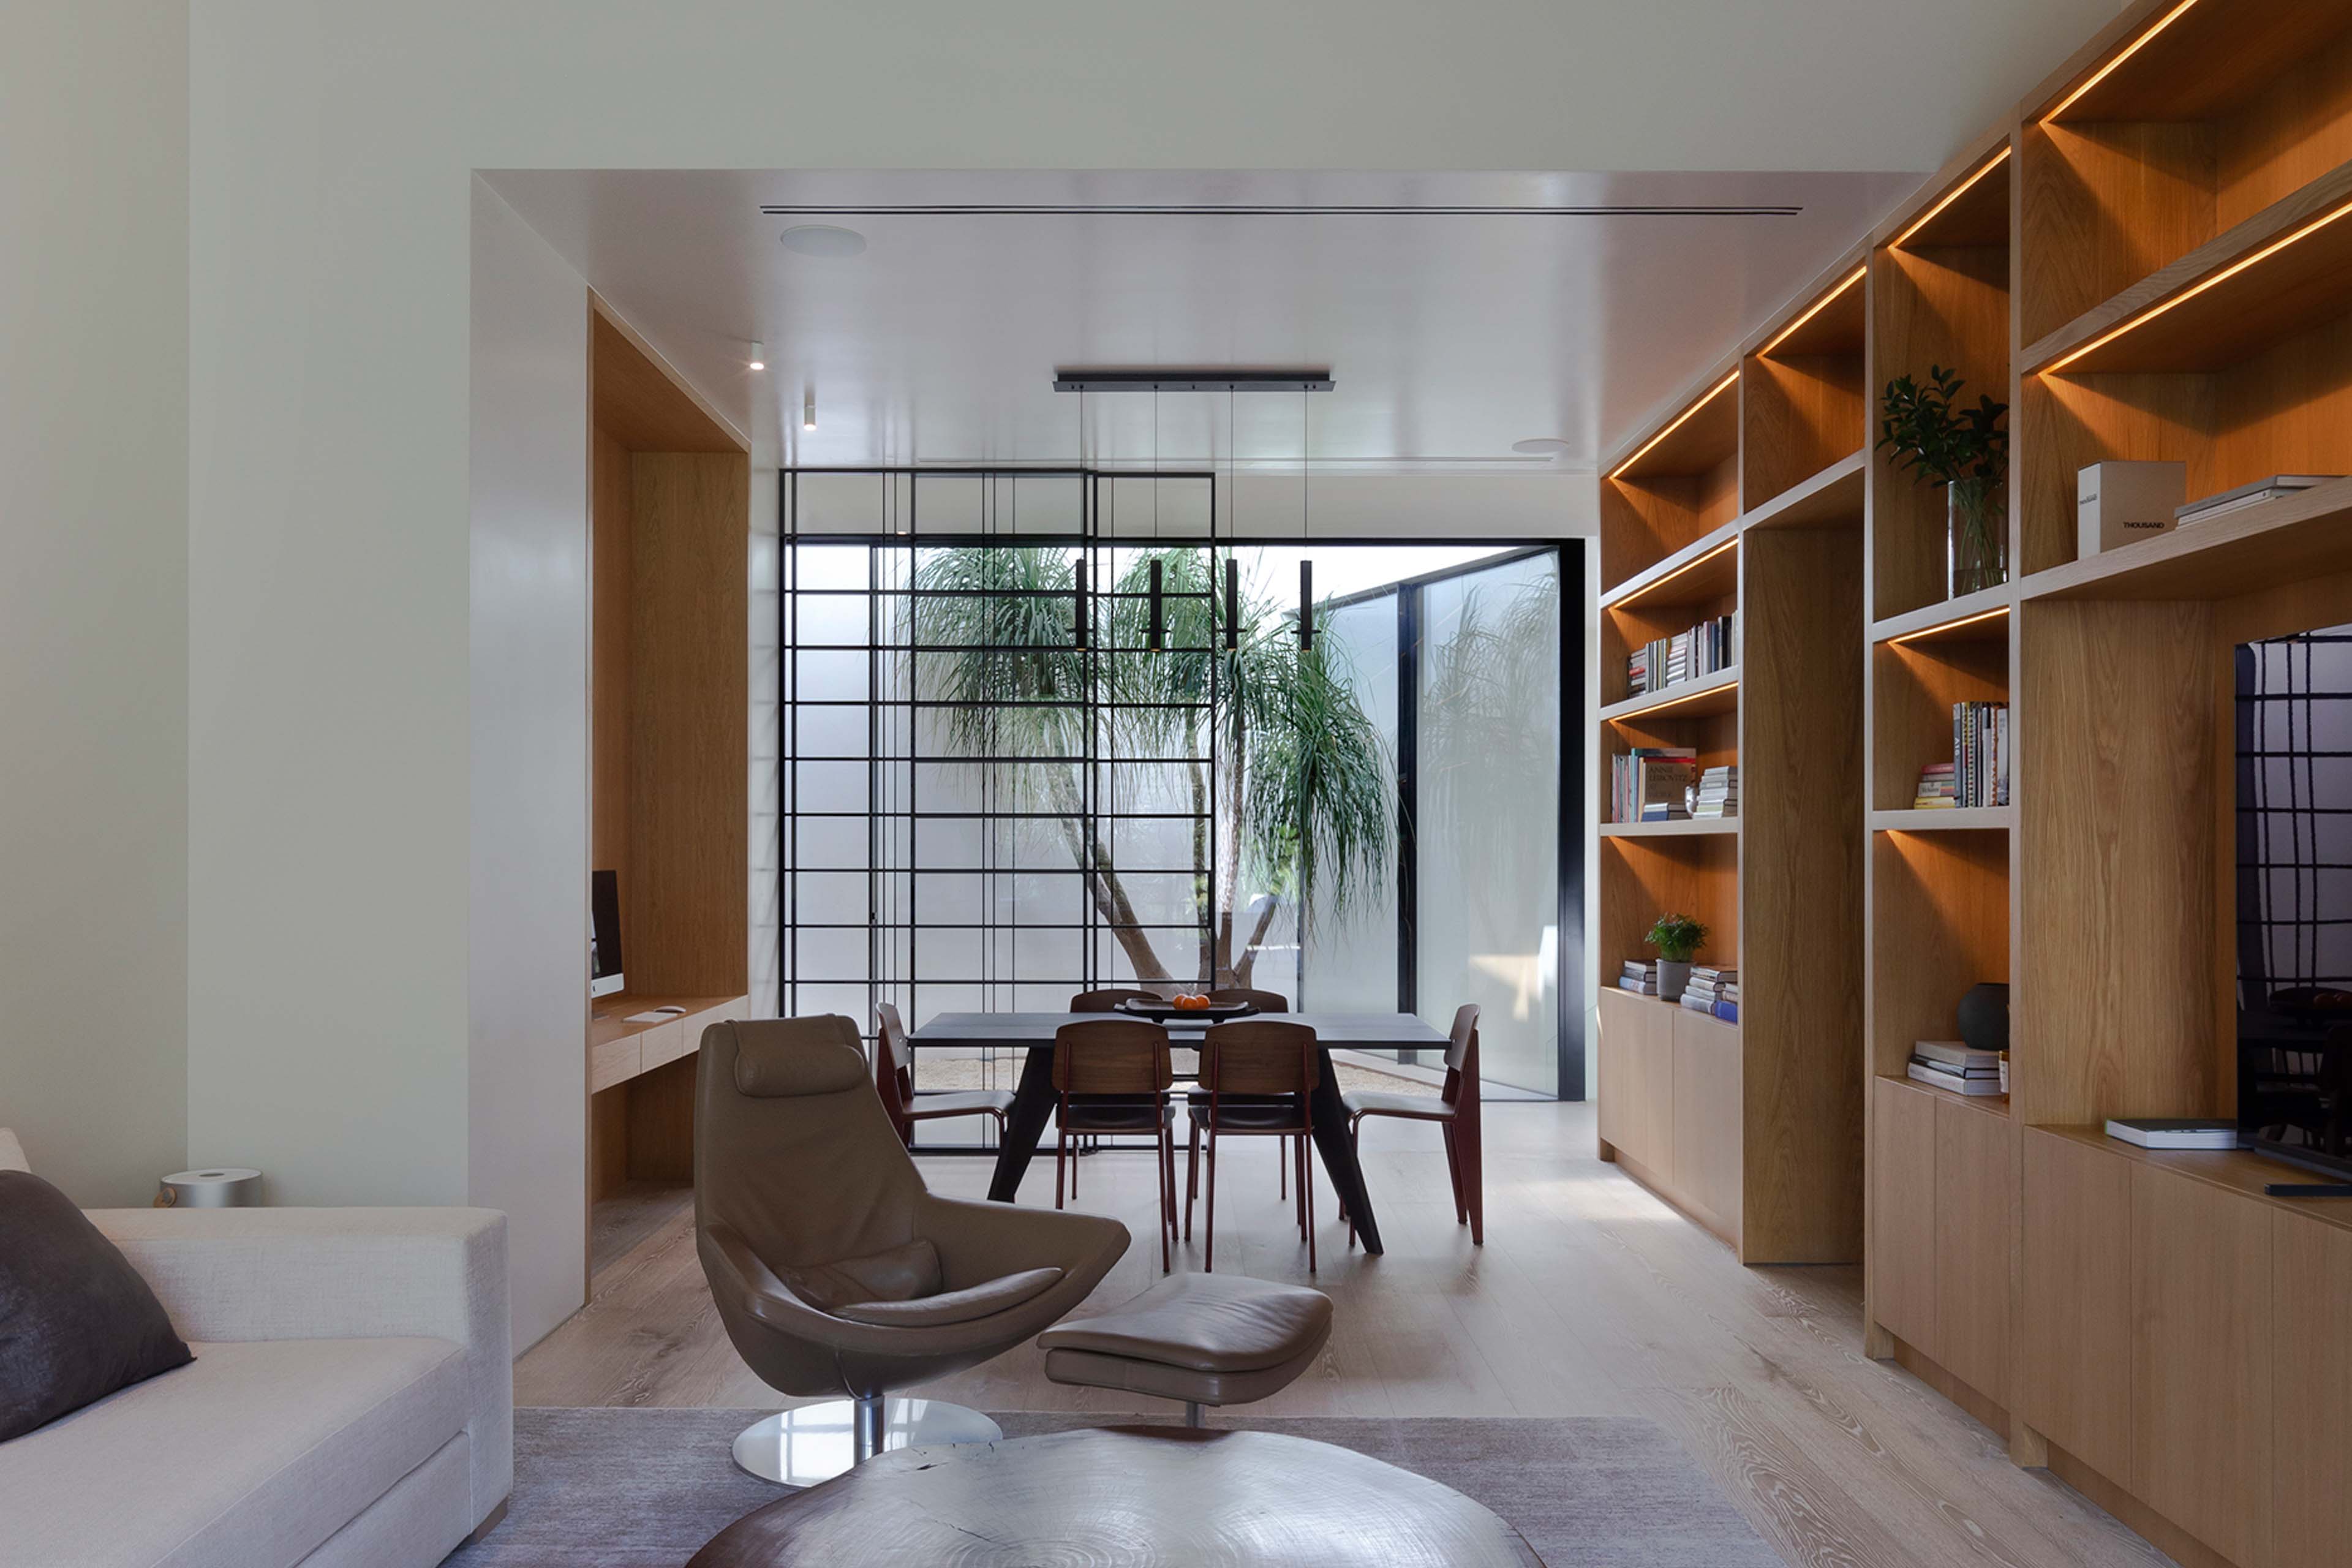 Warm and neutral interior space connecting to the courtyard